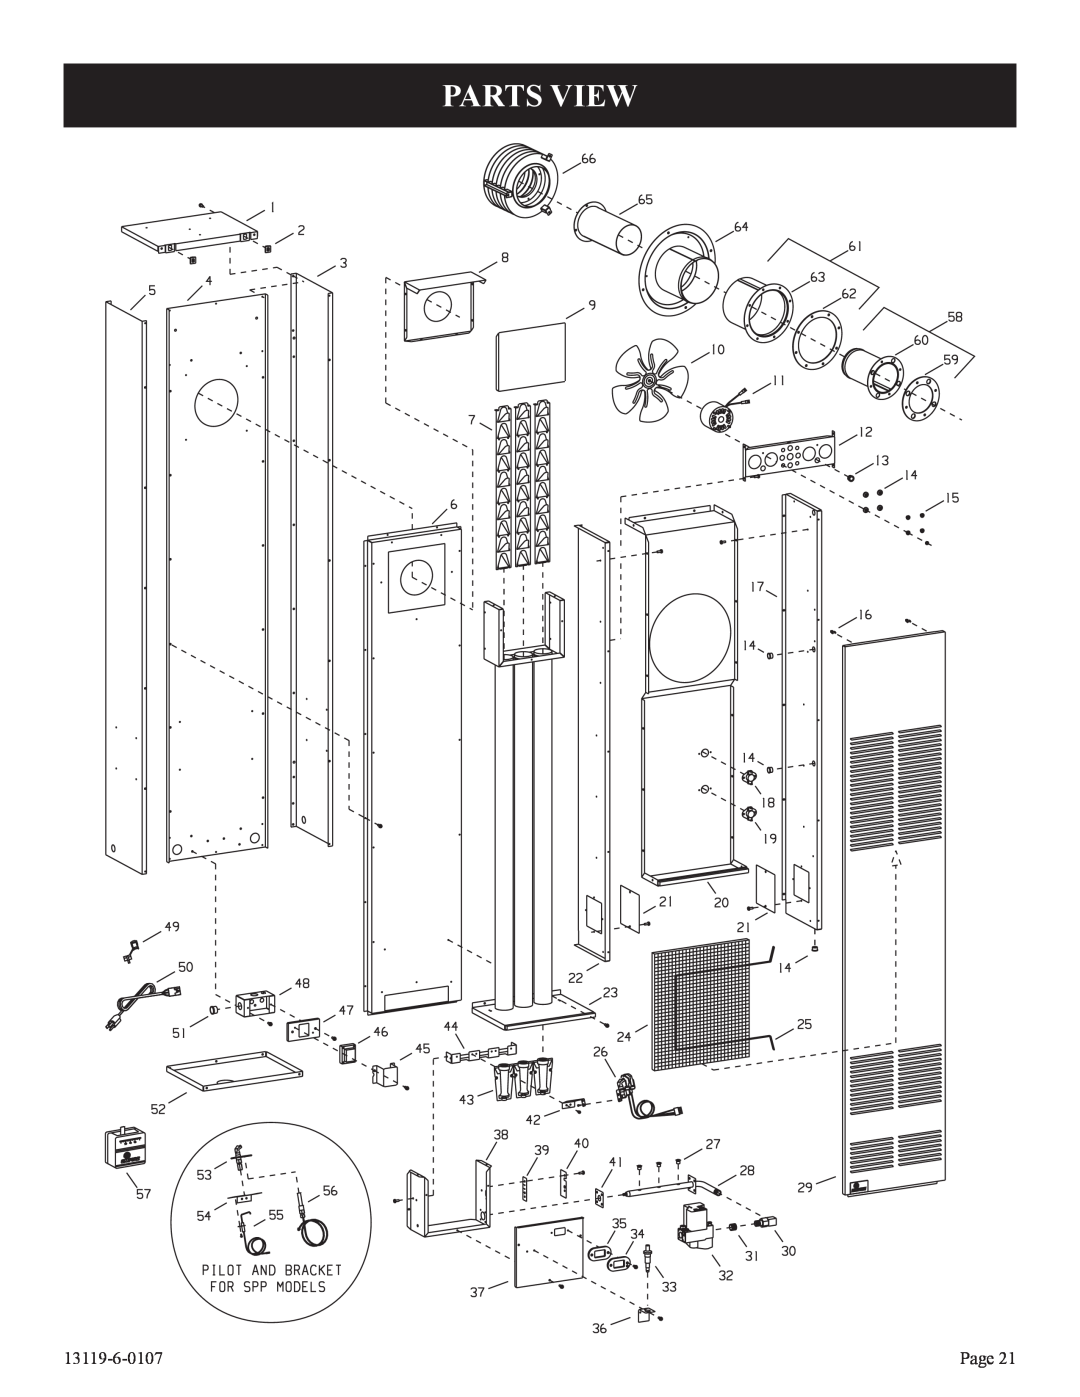 Empire Products DVC-35T-1, DVC-35IPT-1 installation instructions Parts View, 13119-6-0107, Page 